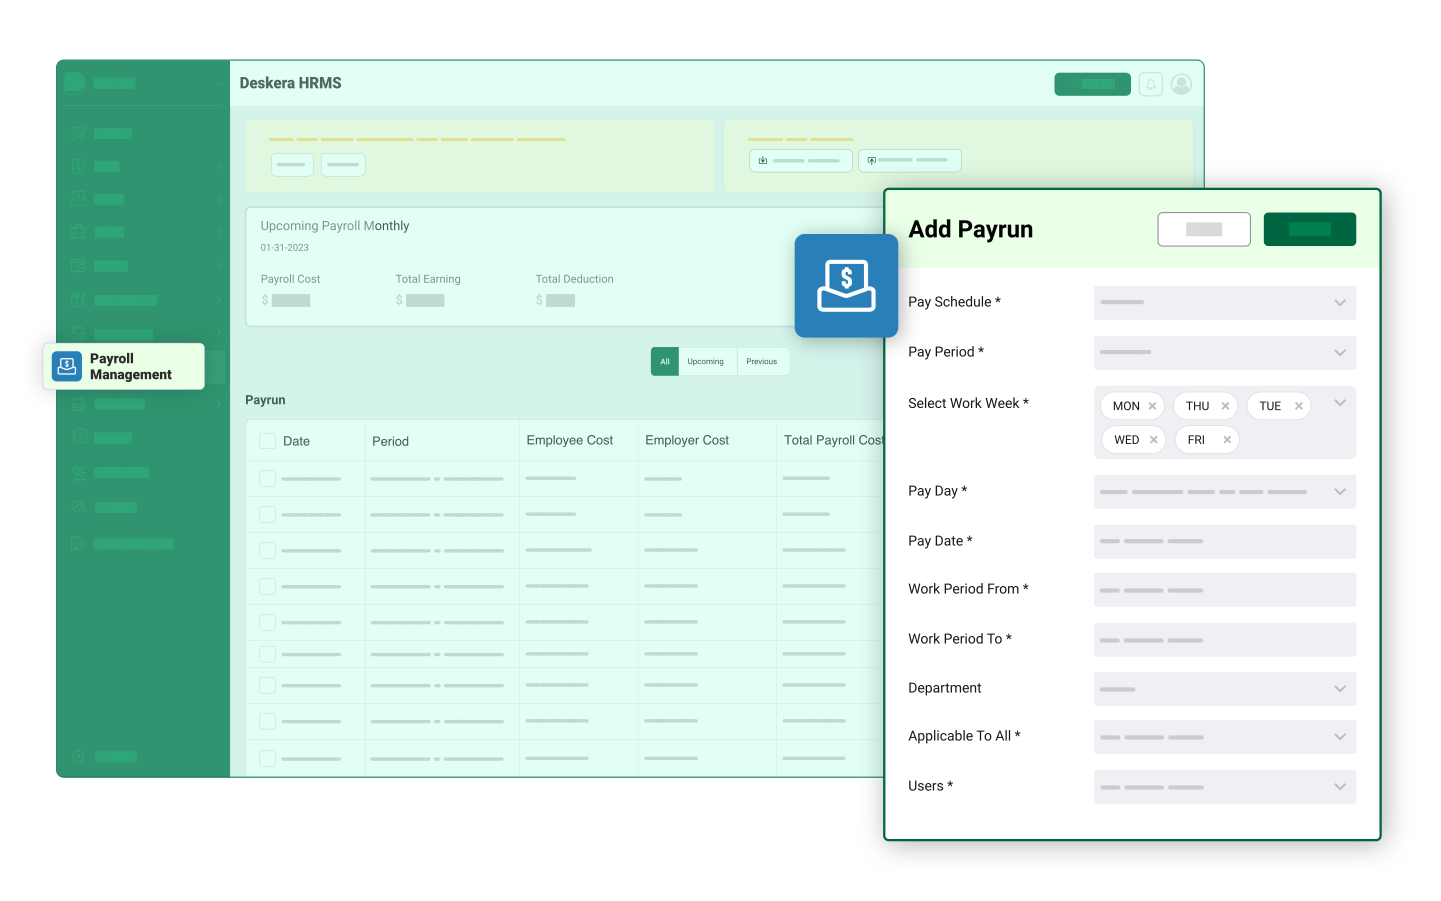 Easily process payroll with a few clicks. Automate calculations, deductions, and salary payments. Generate detailed and accurate payroll reports.